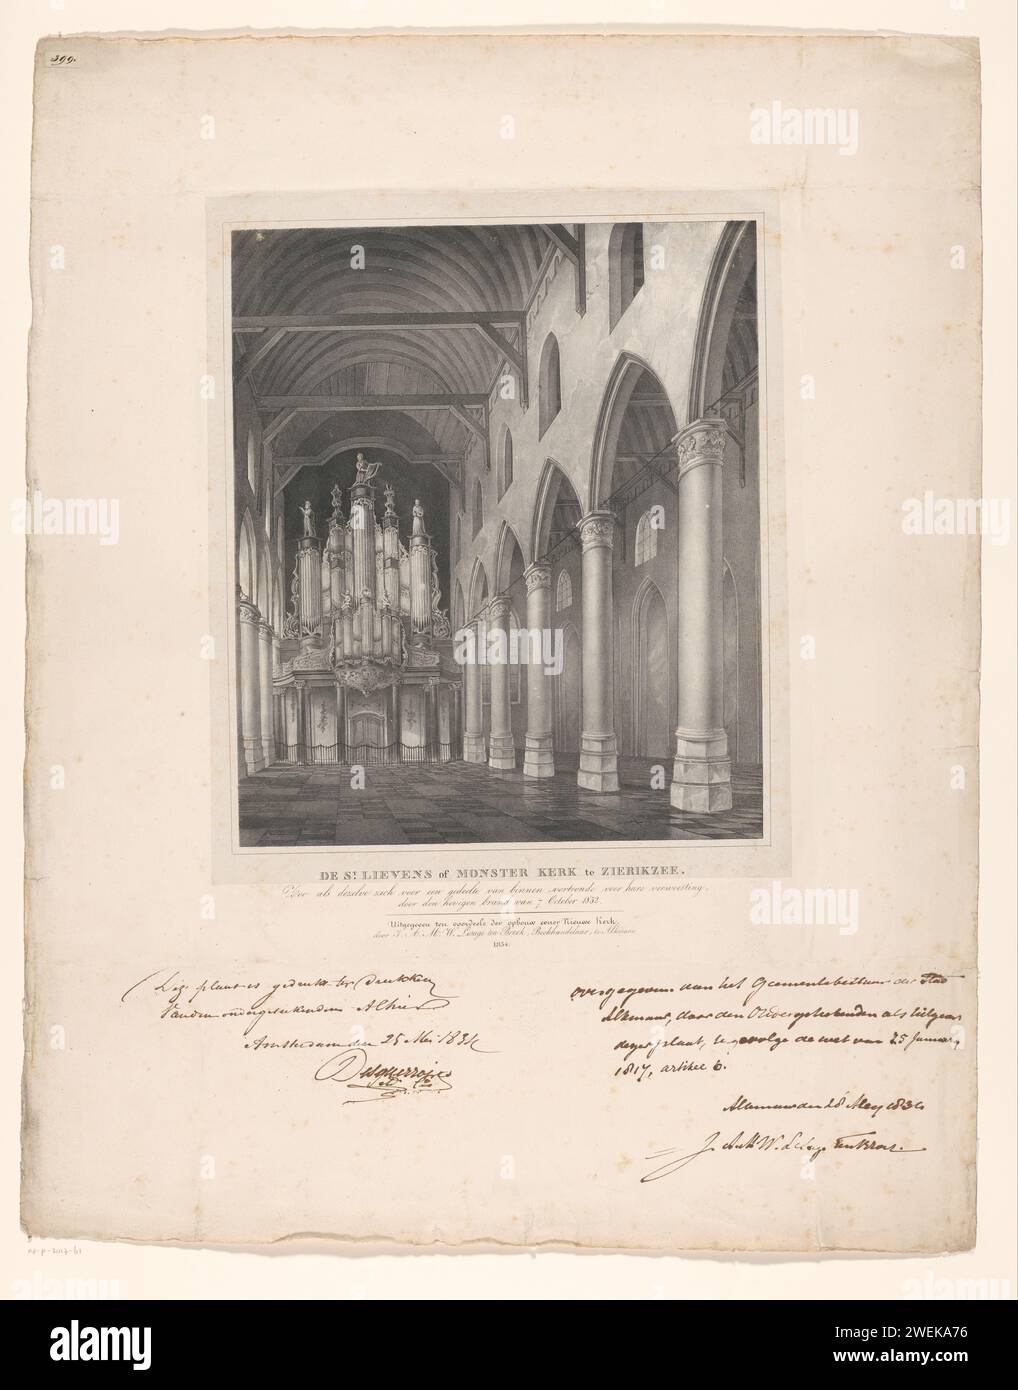 Interior of the Sint-Lievensmonsterkerk in Zierikzee, before the fire of 1832, Anonymous, After Jacob Korsten, 1834 print Interior of the Sint-Lievensmonsterkerk in Zierikzee, in Welstand, before the fire of October 6, 1832. Face from the interior towards the organ. The church has a wooden ceiling. On the right a side aisle, separated from the ship by columns.  paper.  parts of church interior. church organ Sint-Lievensmonsterkerk Stock Photo